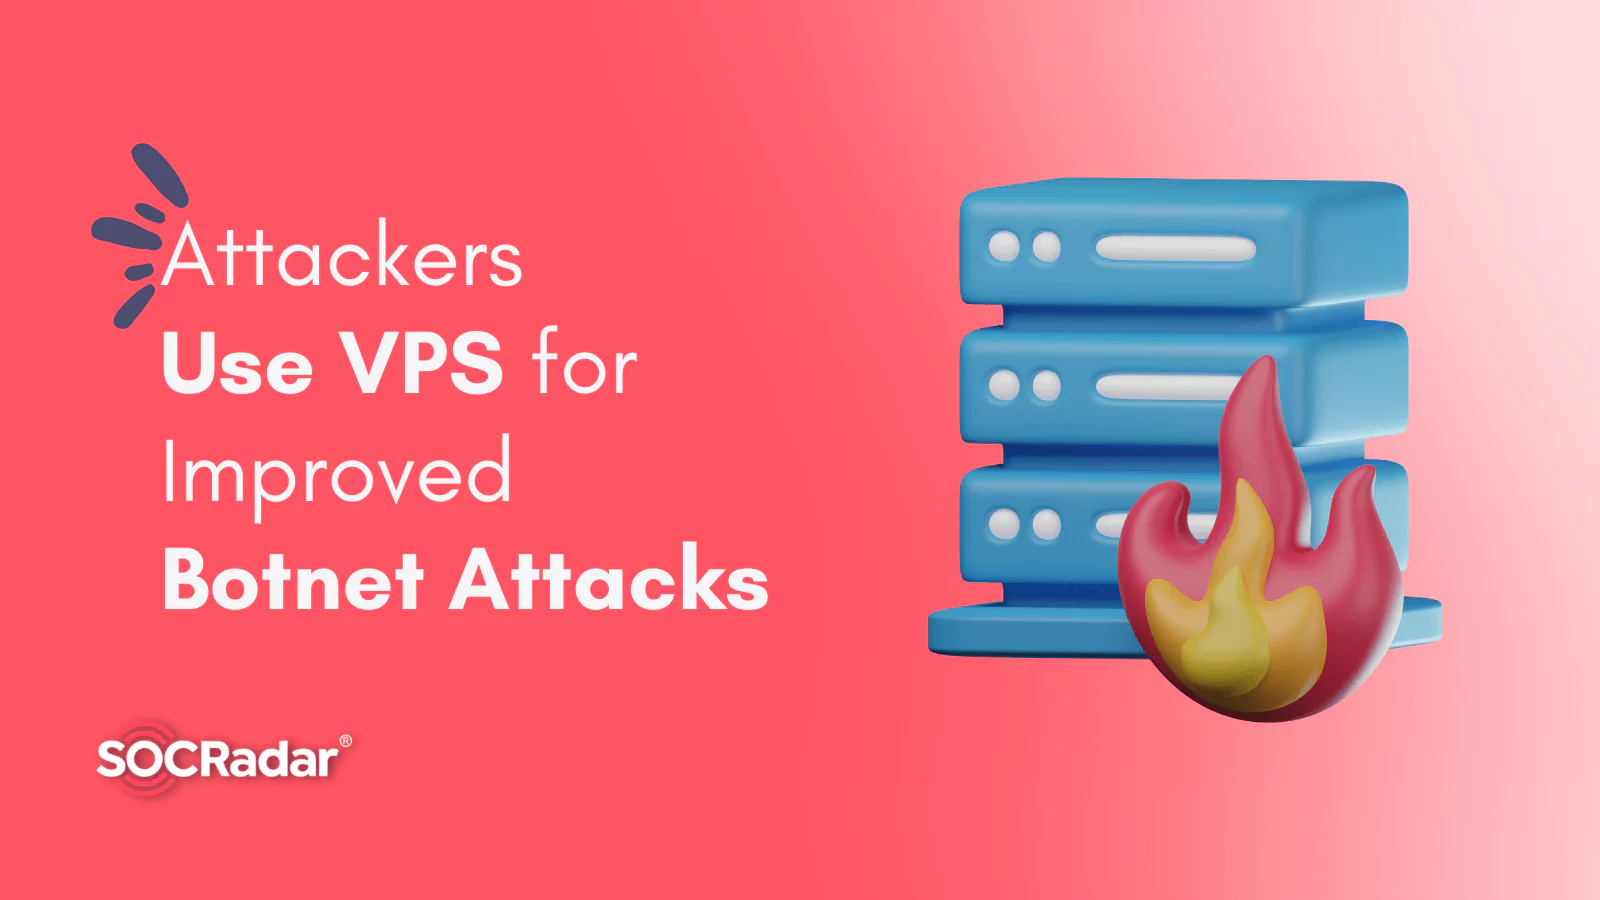 SOCRadar® Cyber Intelligence Inc. | Change of Tactic in DDoS: Attackers Now Use VPS for Improved Botnet Attacks